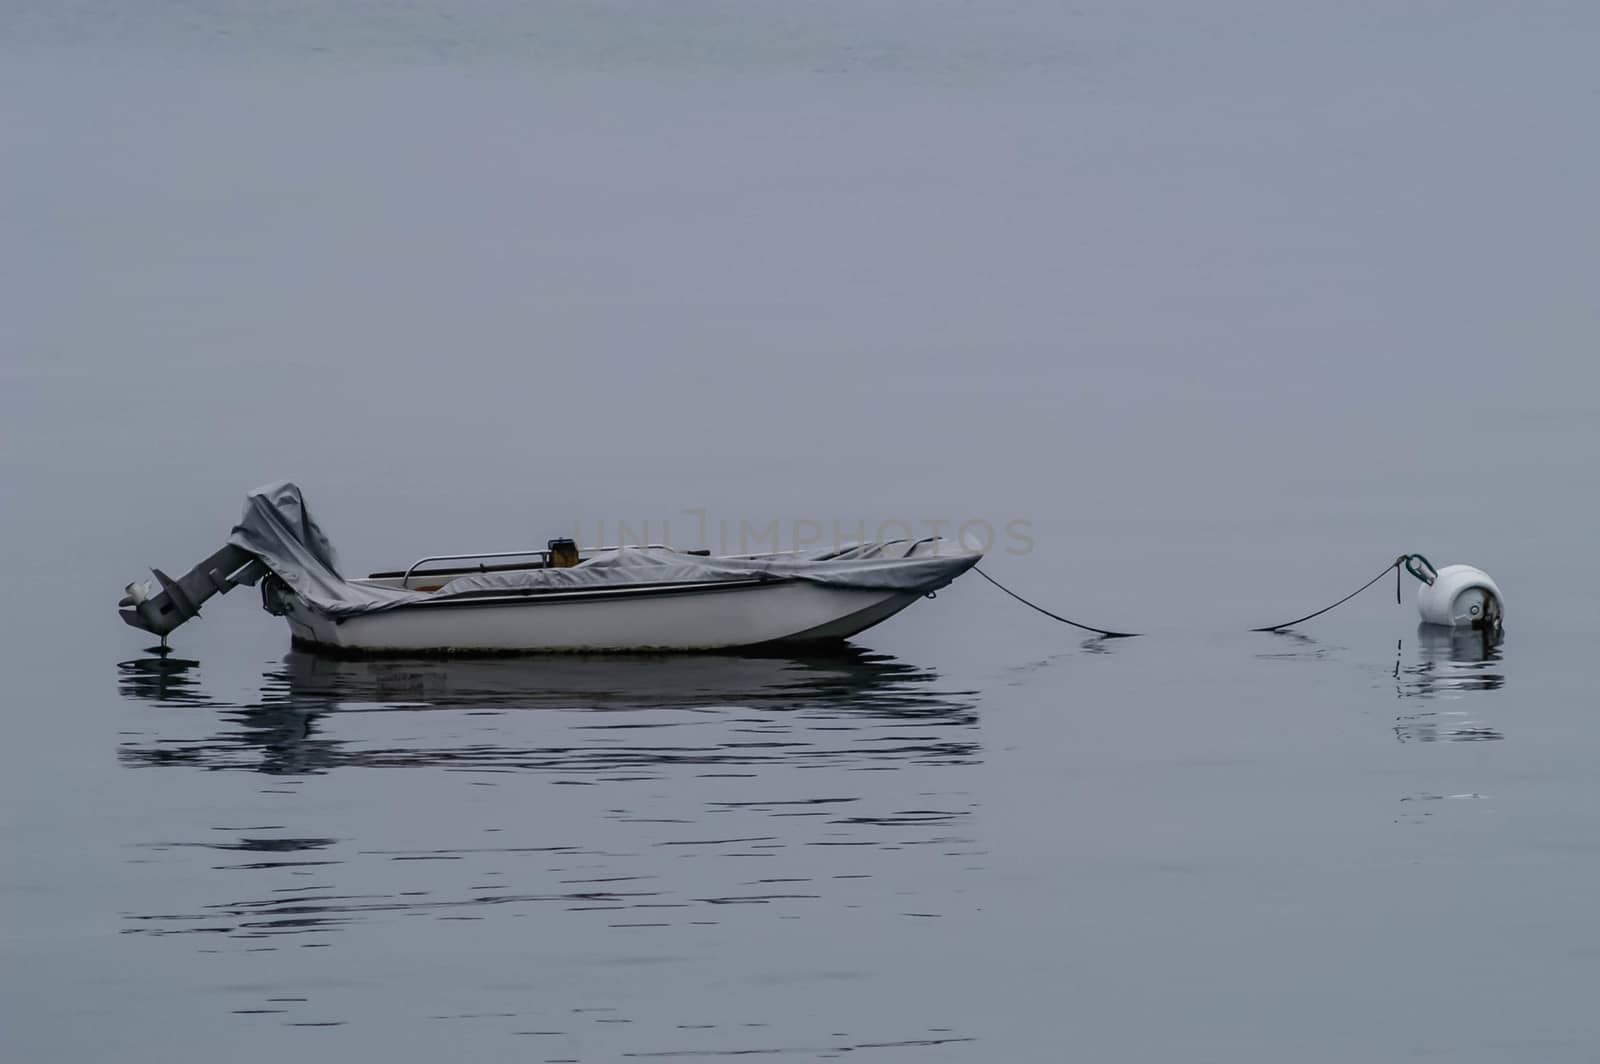 Small skiff at its moorings on a foggy morning.